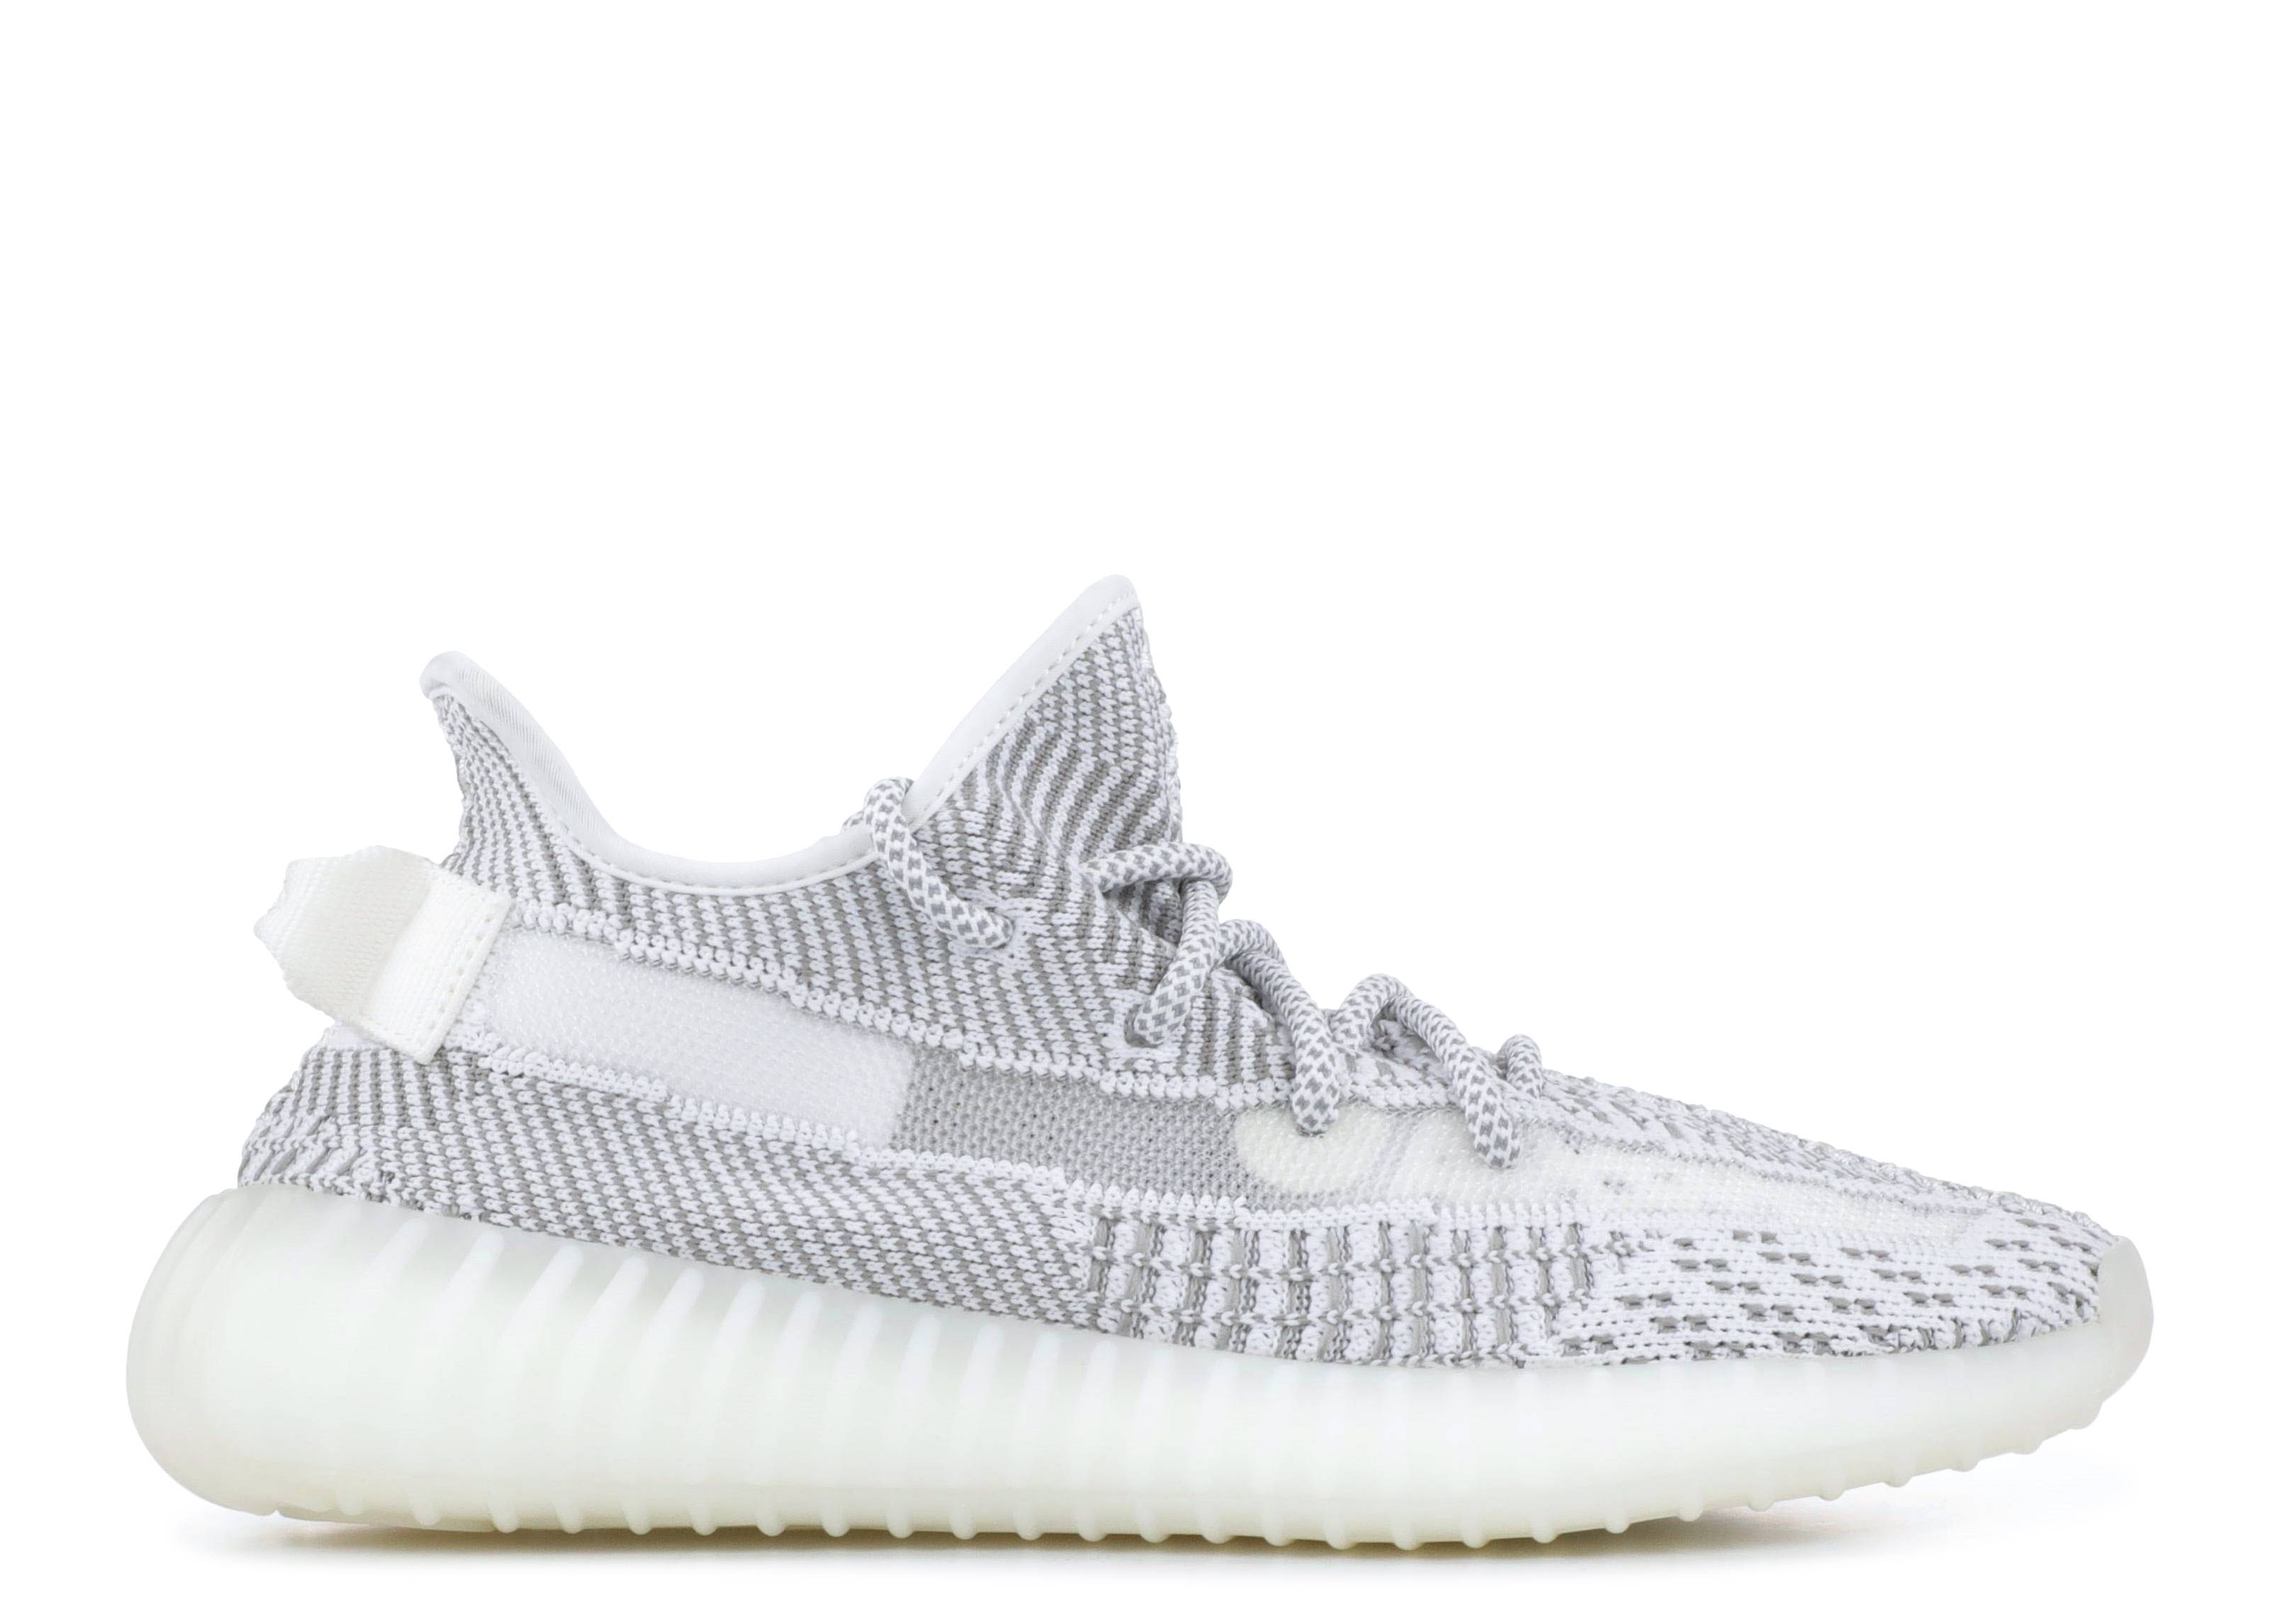 Yeezy Boost 350 V2 Static Non-Reflective